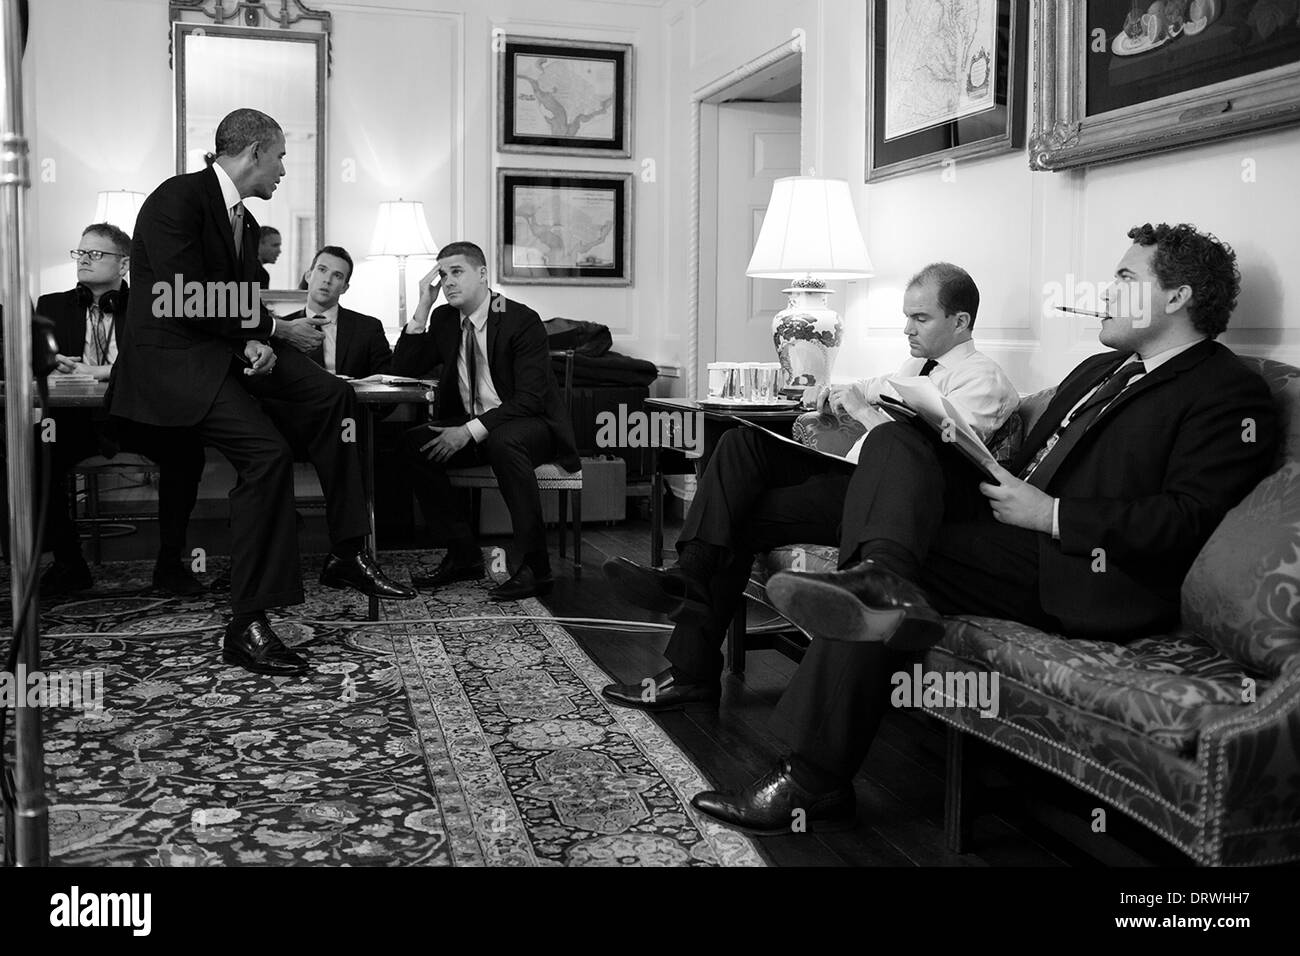 US President Barack Obama works on his address to the nation on Syria with staff in the Map Room of the White House September 10, 2013 in Washington, DC. Seated from right are: Director of Speechwriting Cody Keenan; Ben Rhodes, Deputy National Security Advisor for Strategic Communications; Senior Advisor Dan Pfeiffer; and former Director of Speechwriting Jon Favreau. Stock Photo